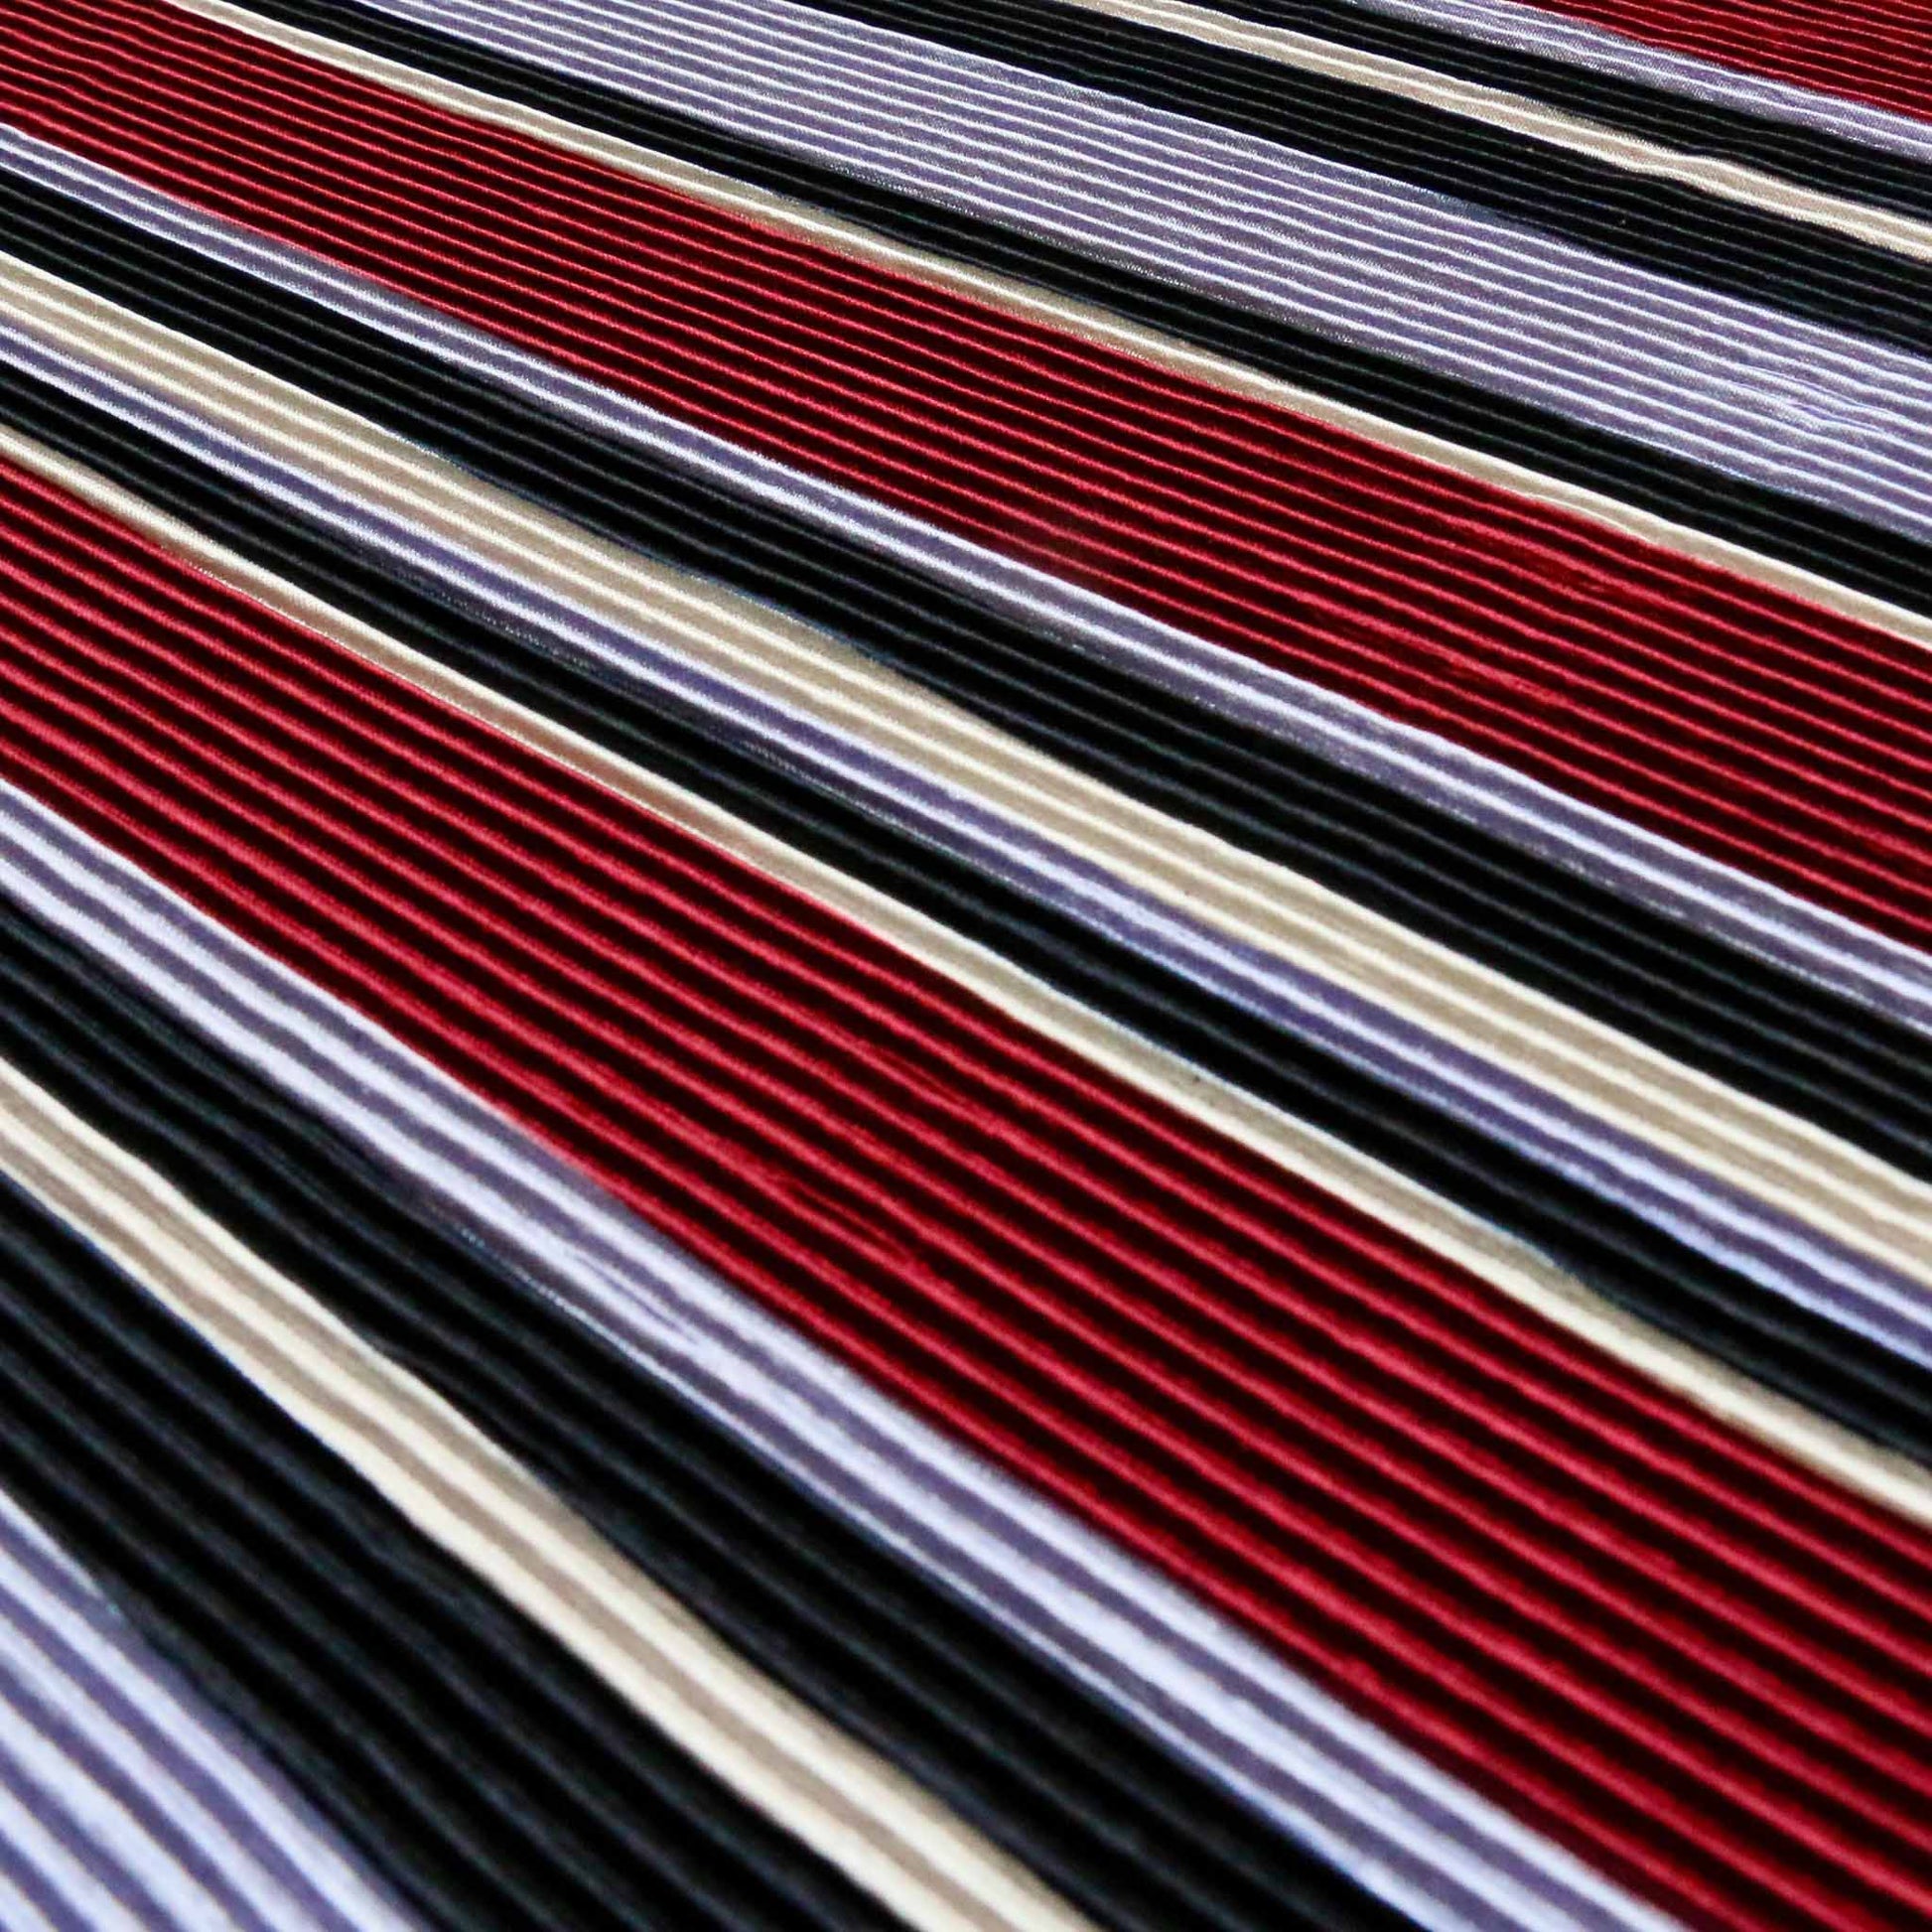 stripey plisse dressmaking fabric with pleated texture and blue and maroon striped design